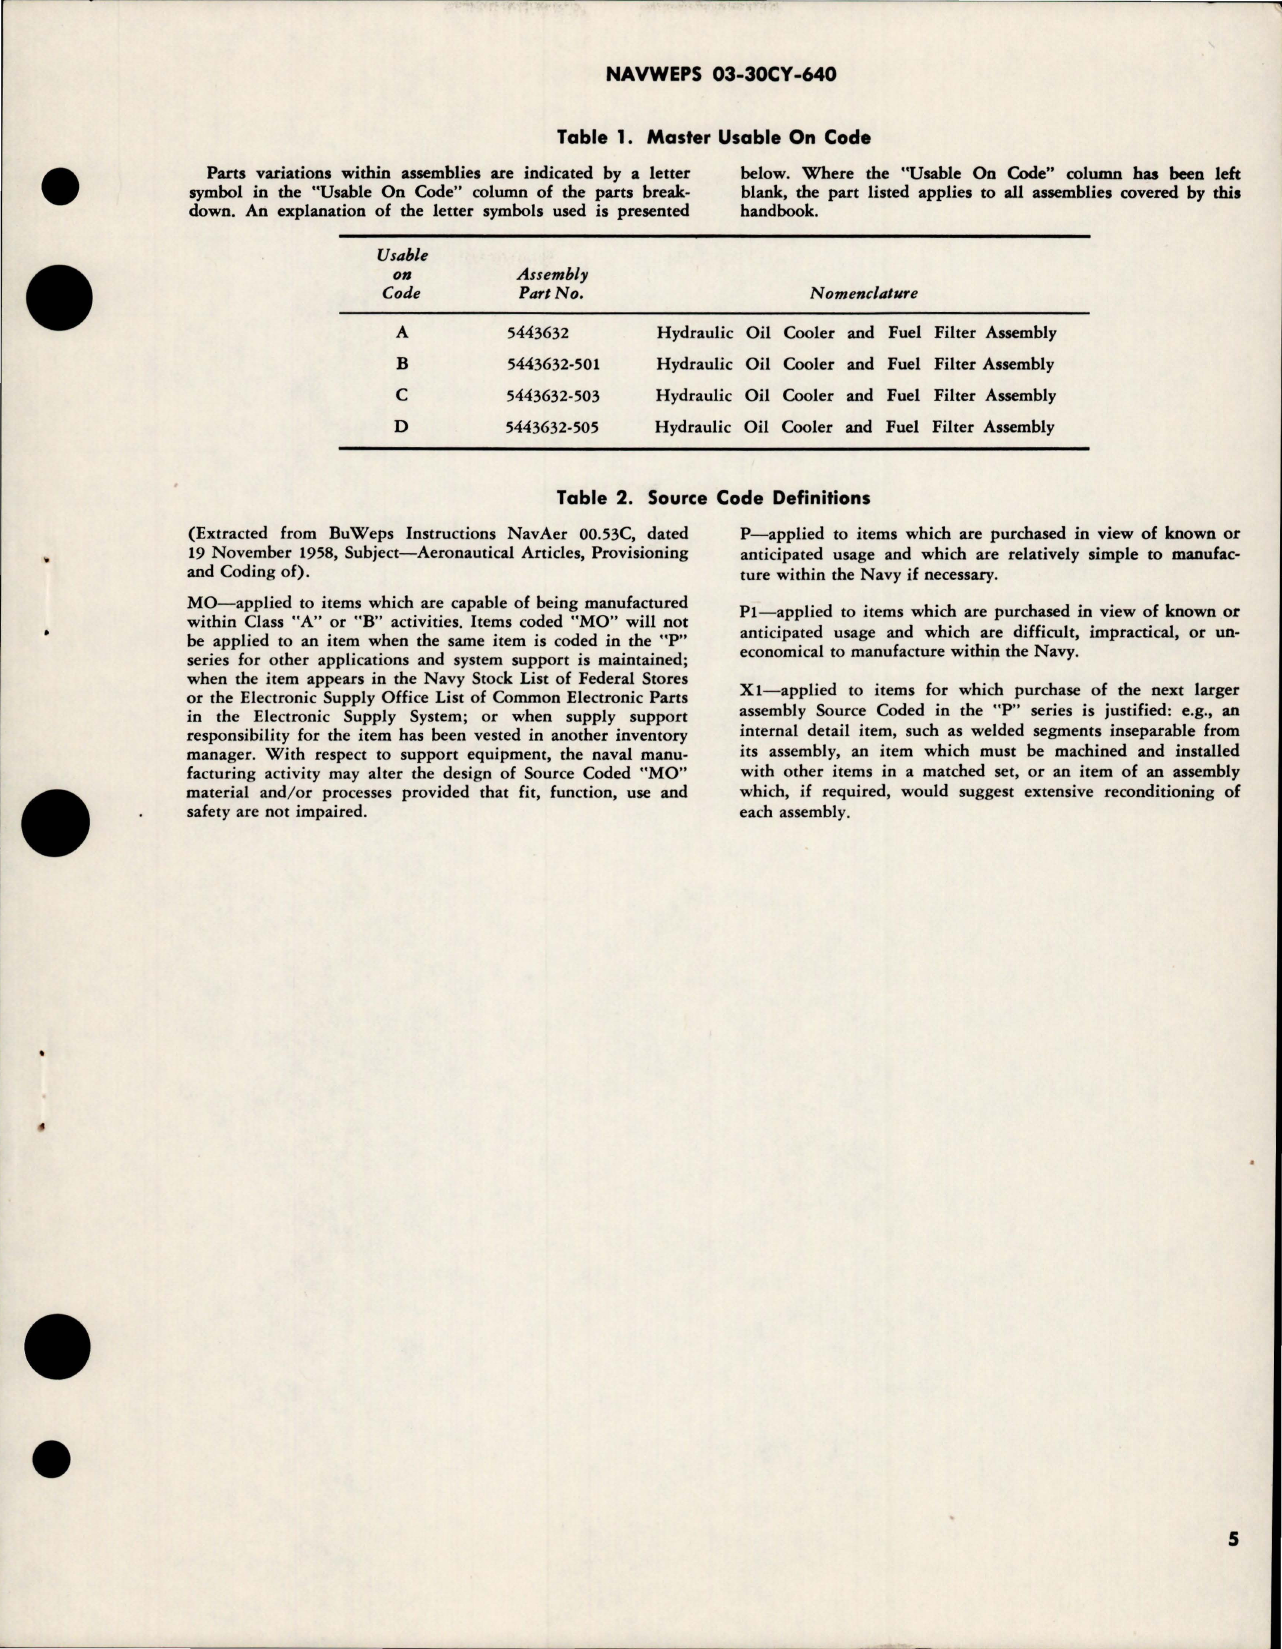 Sample page 5 from AirCorps Library document: Overhaul Instructions with Parts for Hydraulic Oil Cooler and Fuel Filter Assembly 